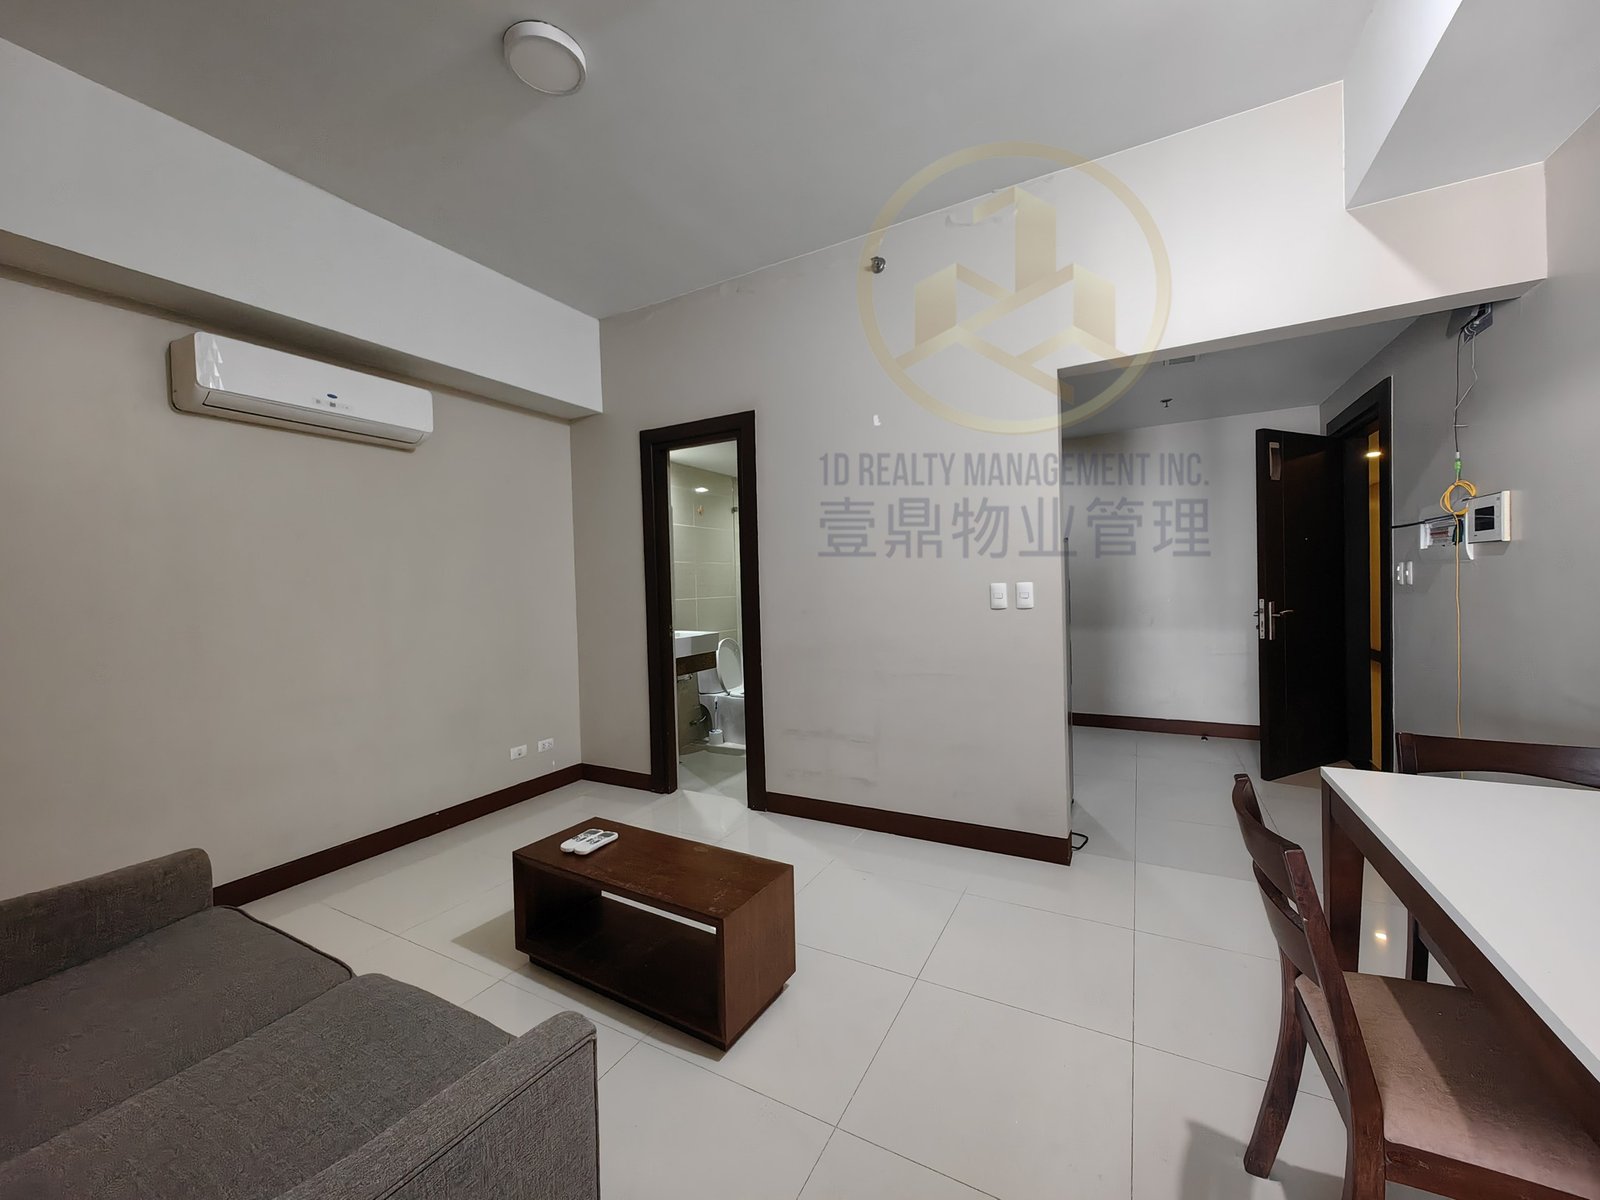 Three Central - Salcedo Village,Makati City - FOR LEASE 1BR